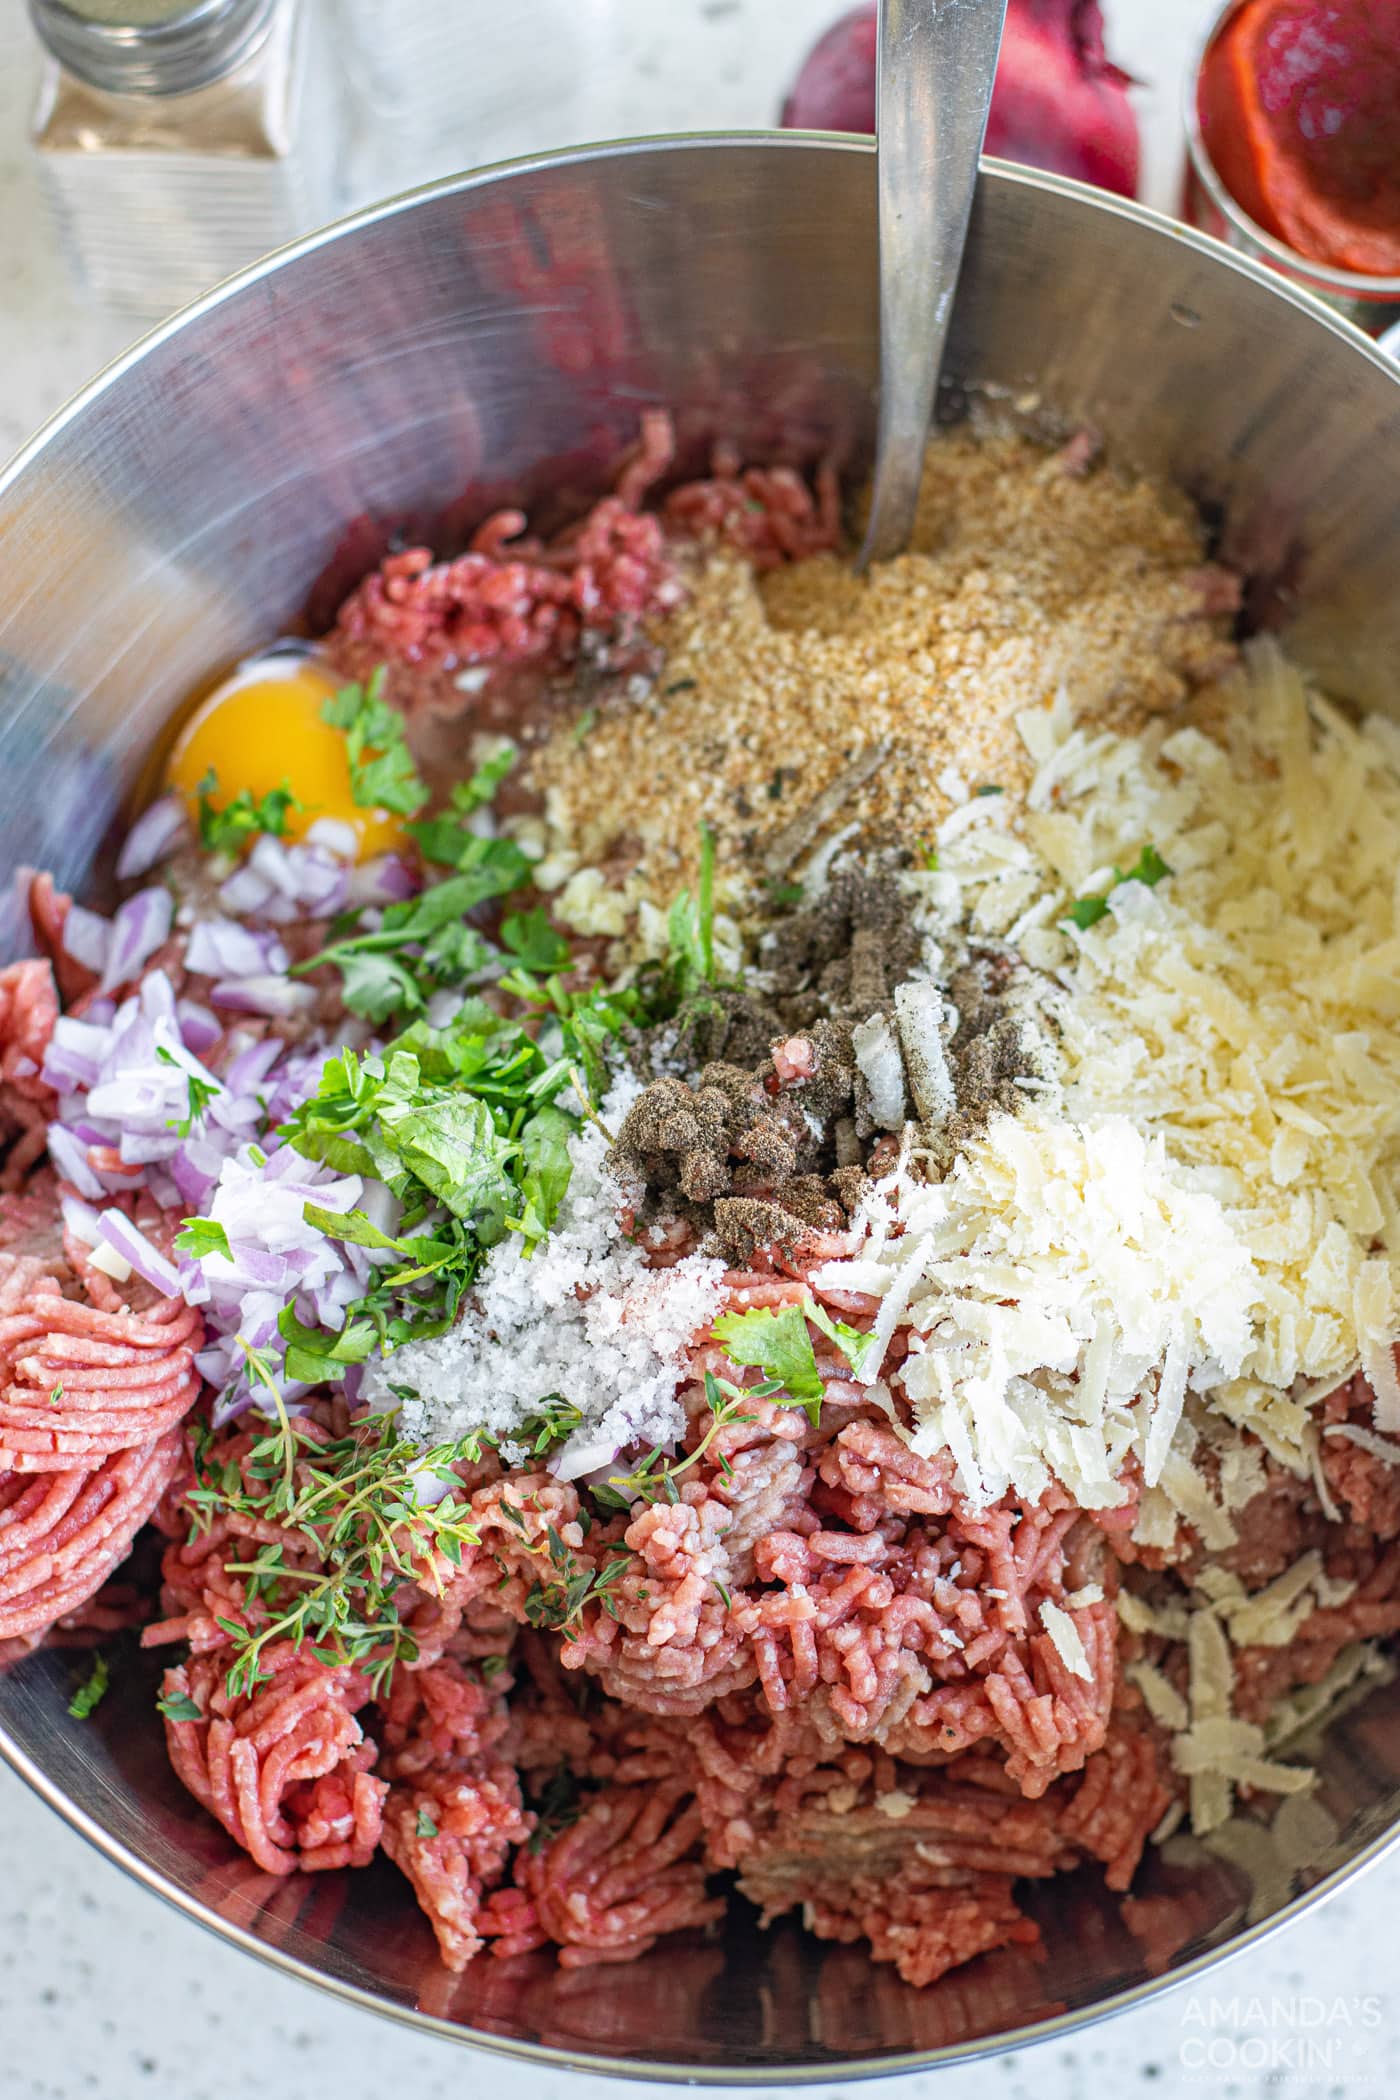 Meatball ingredients in a mixing bowl